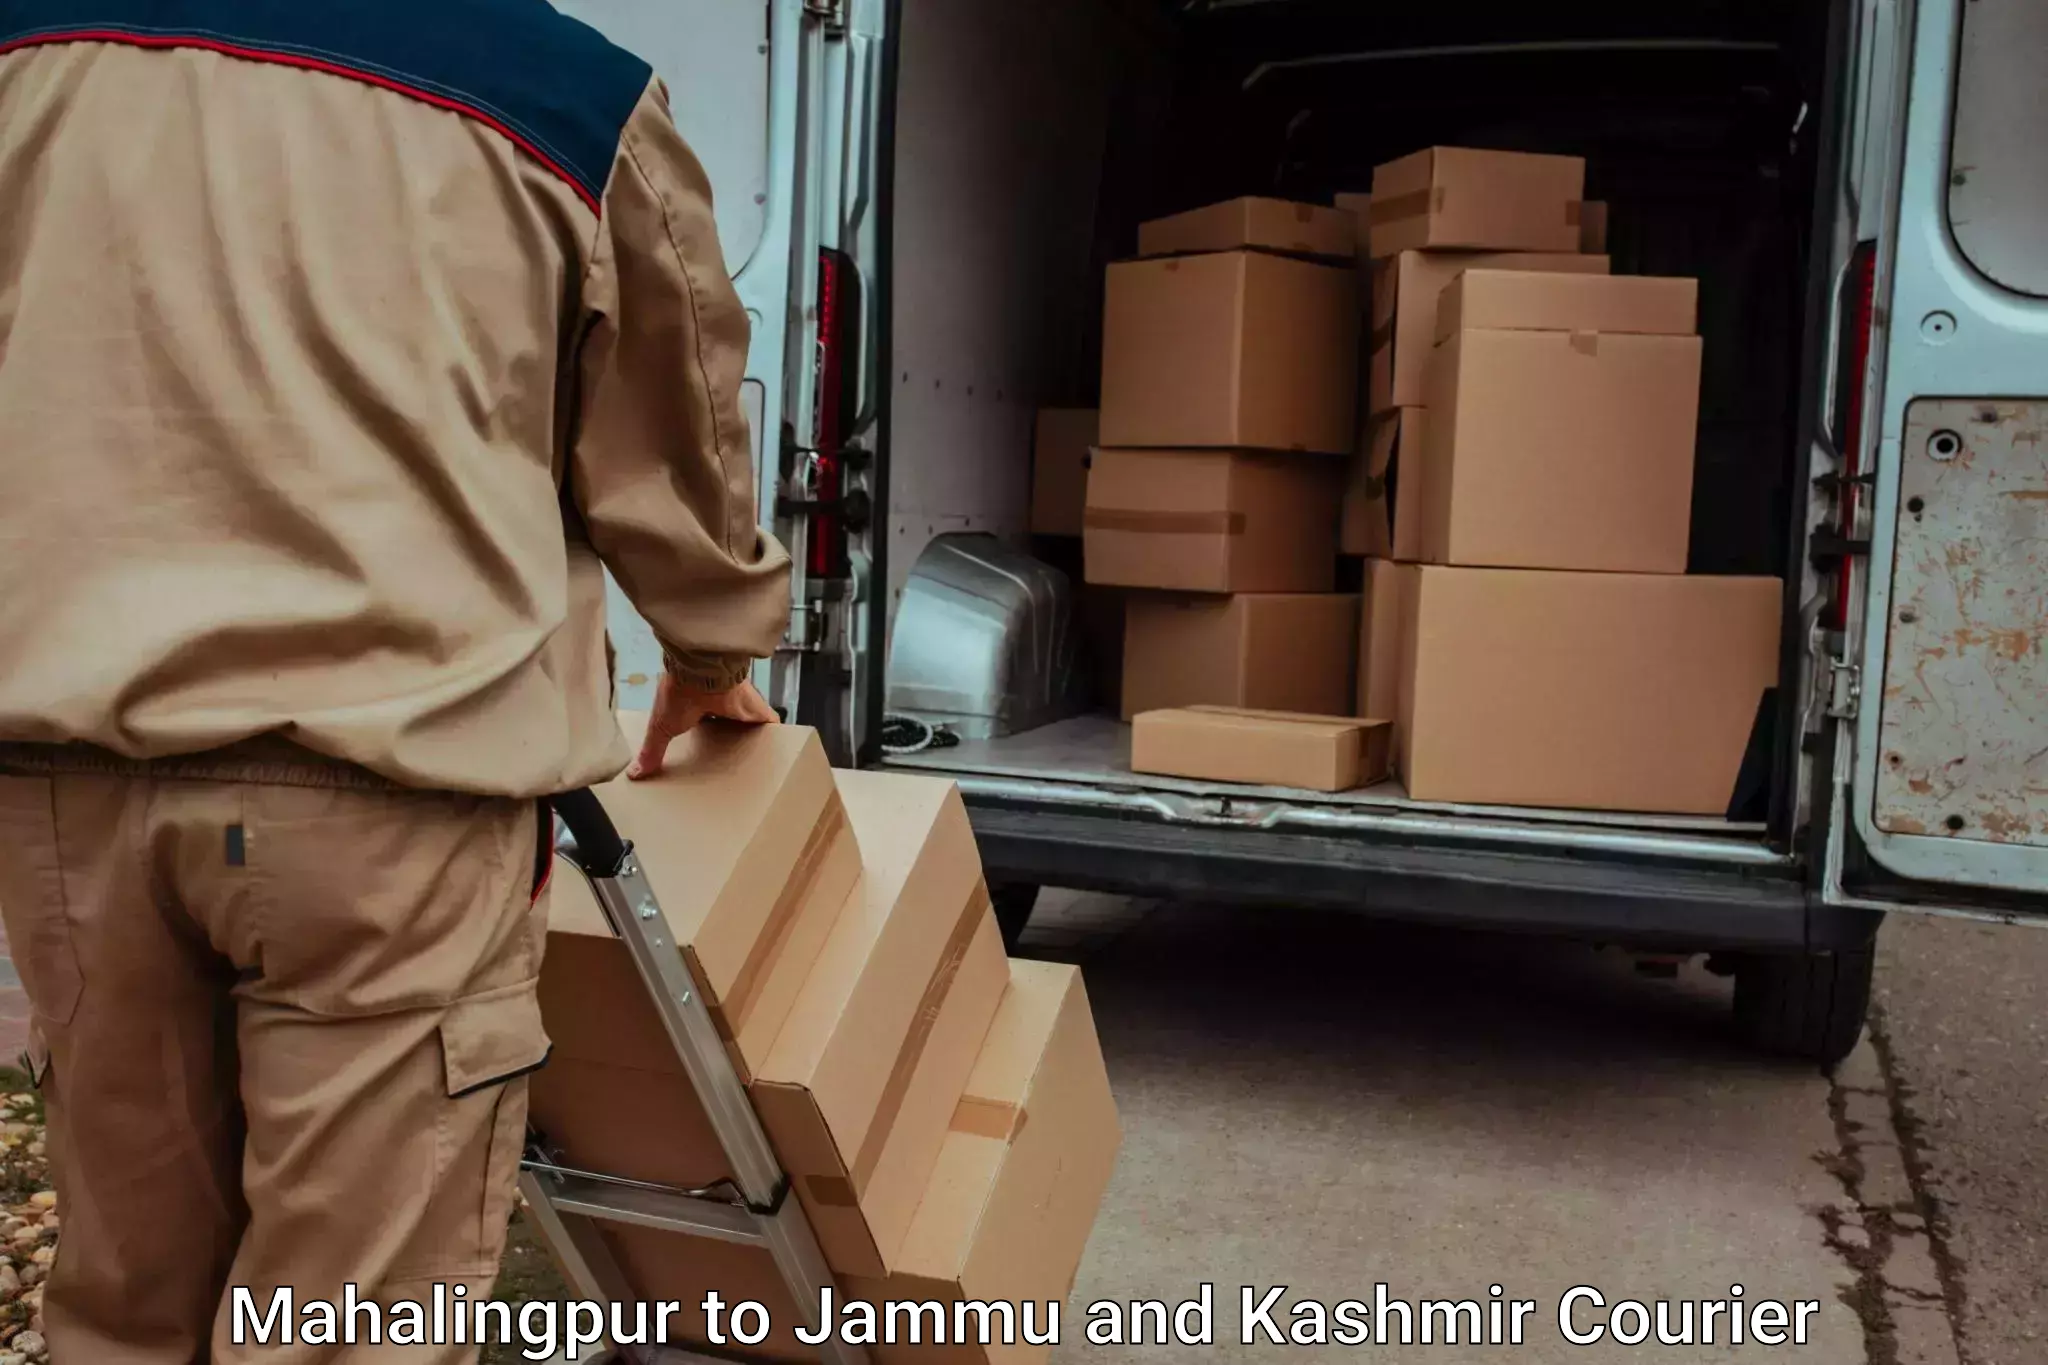 Furniture delivery service Mahalingpur to Udhampur